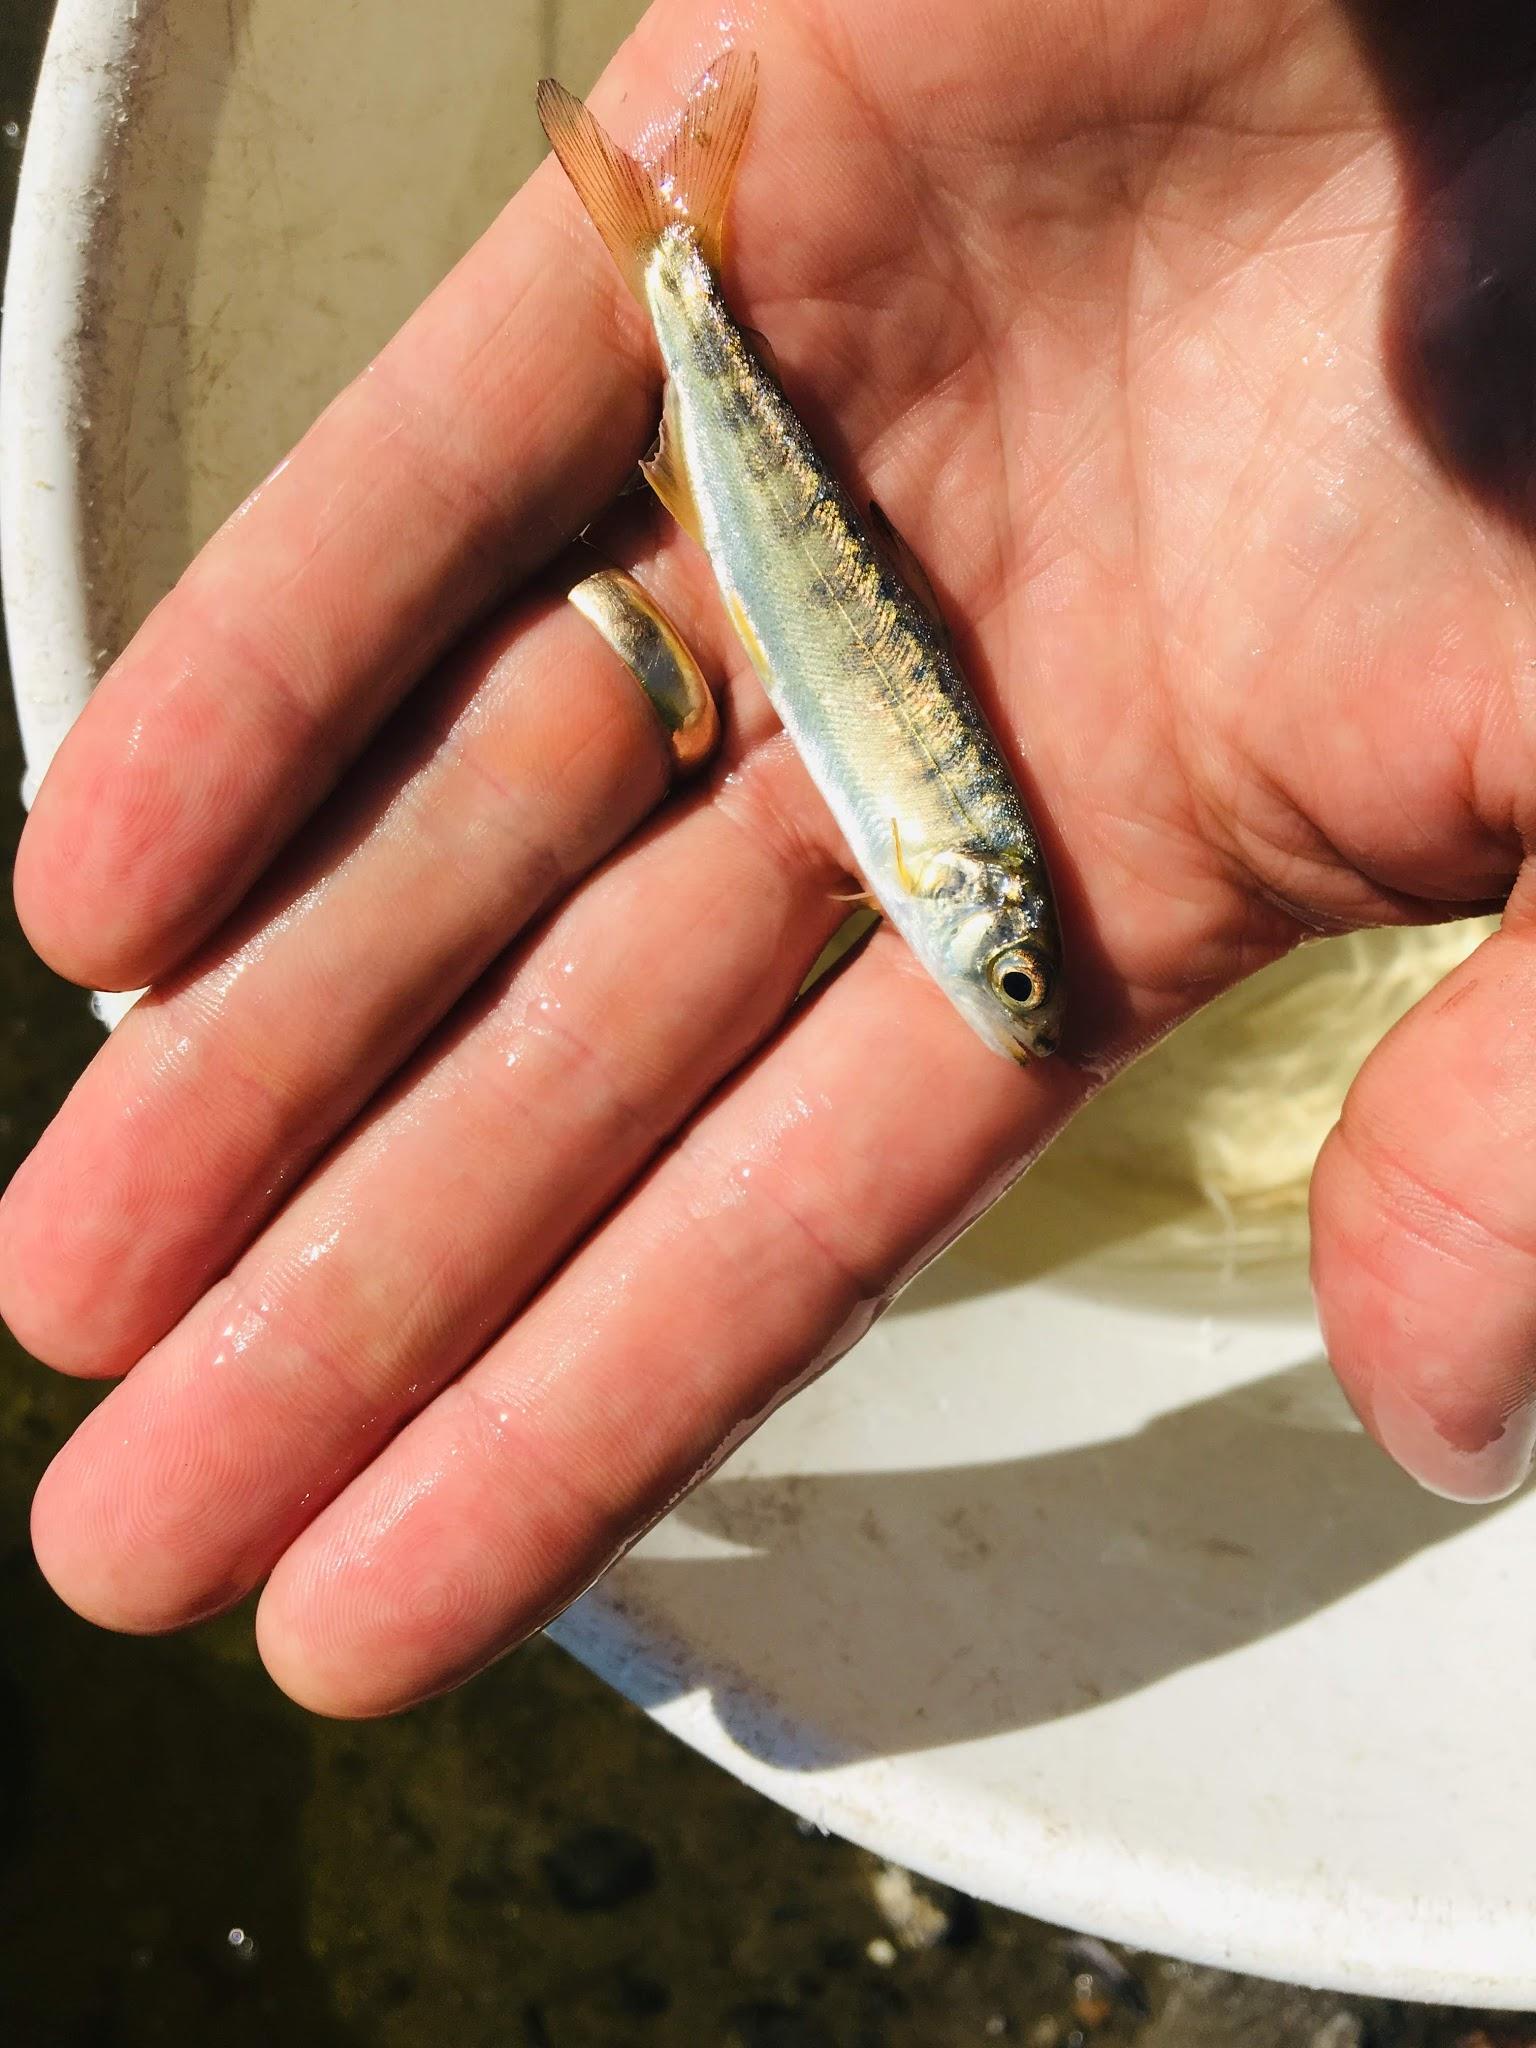 rescuing baby salmon in the Comox Valley